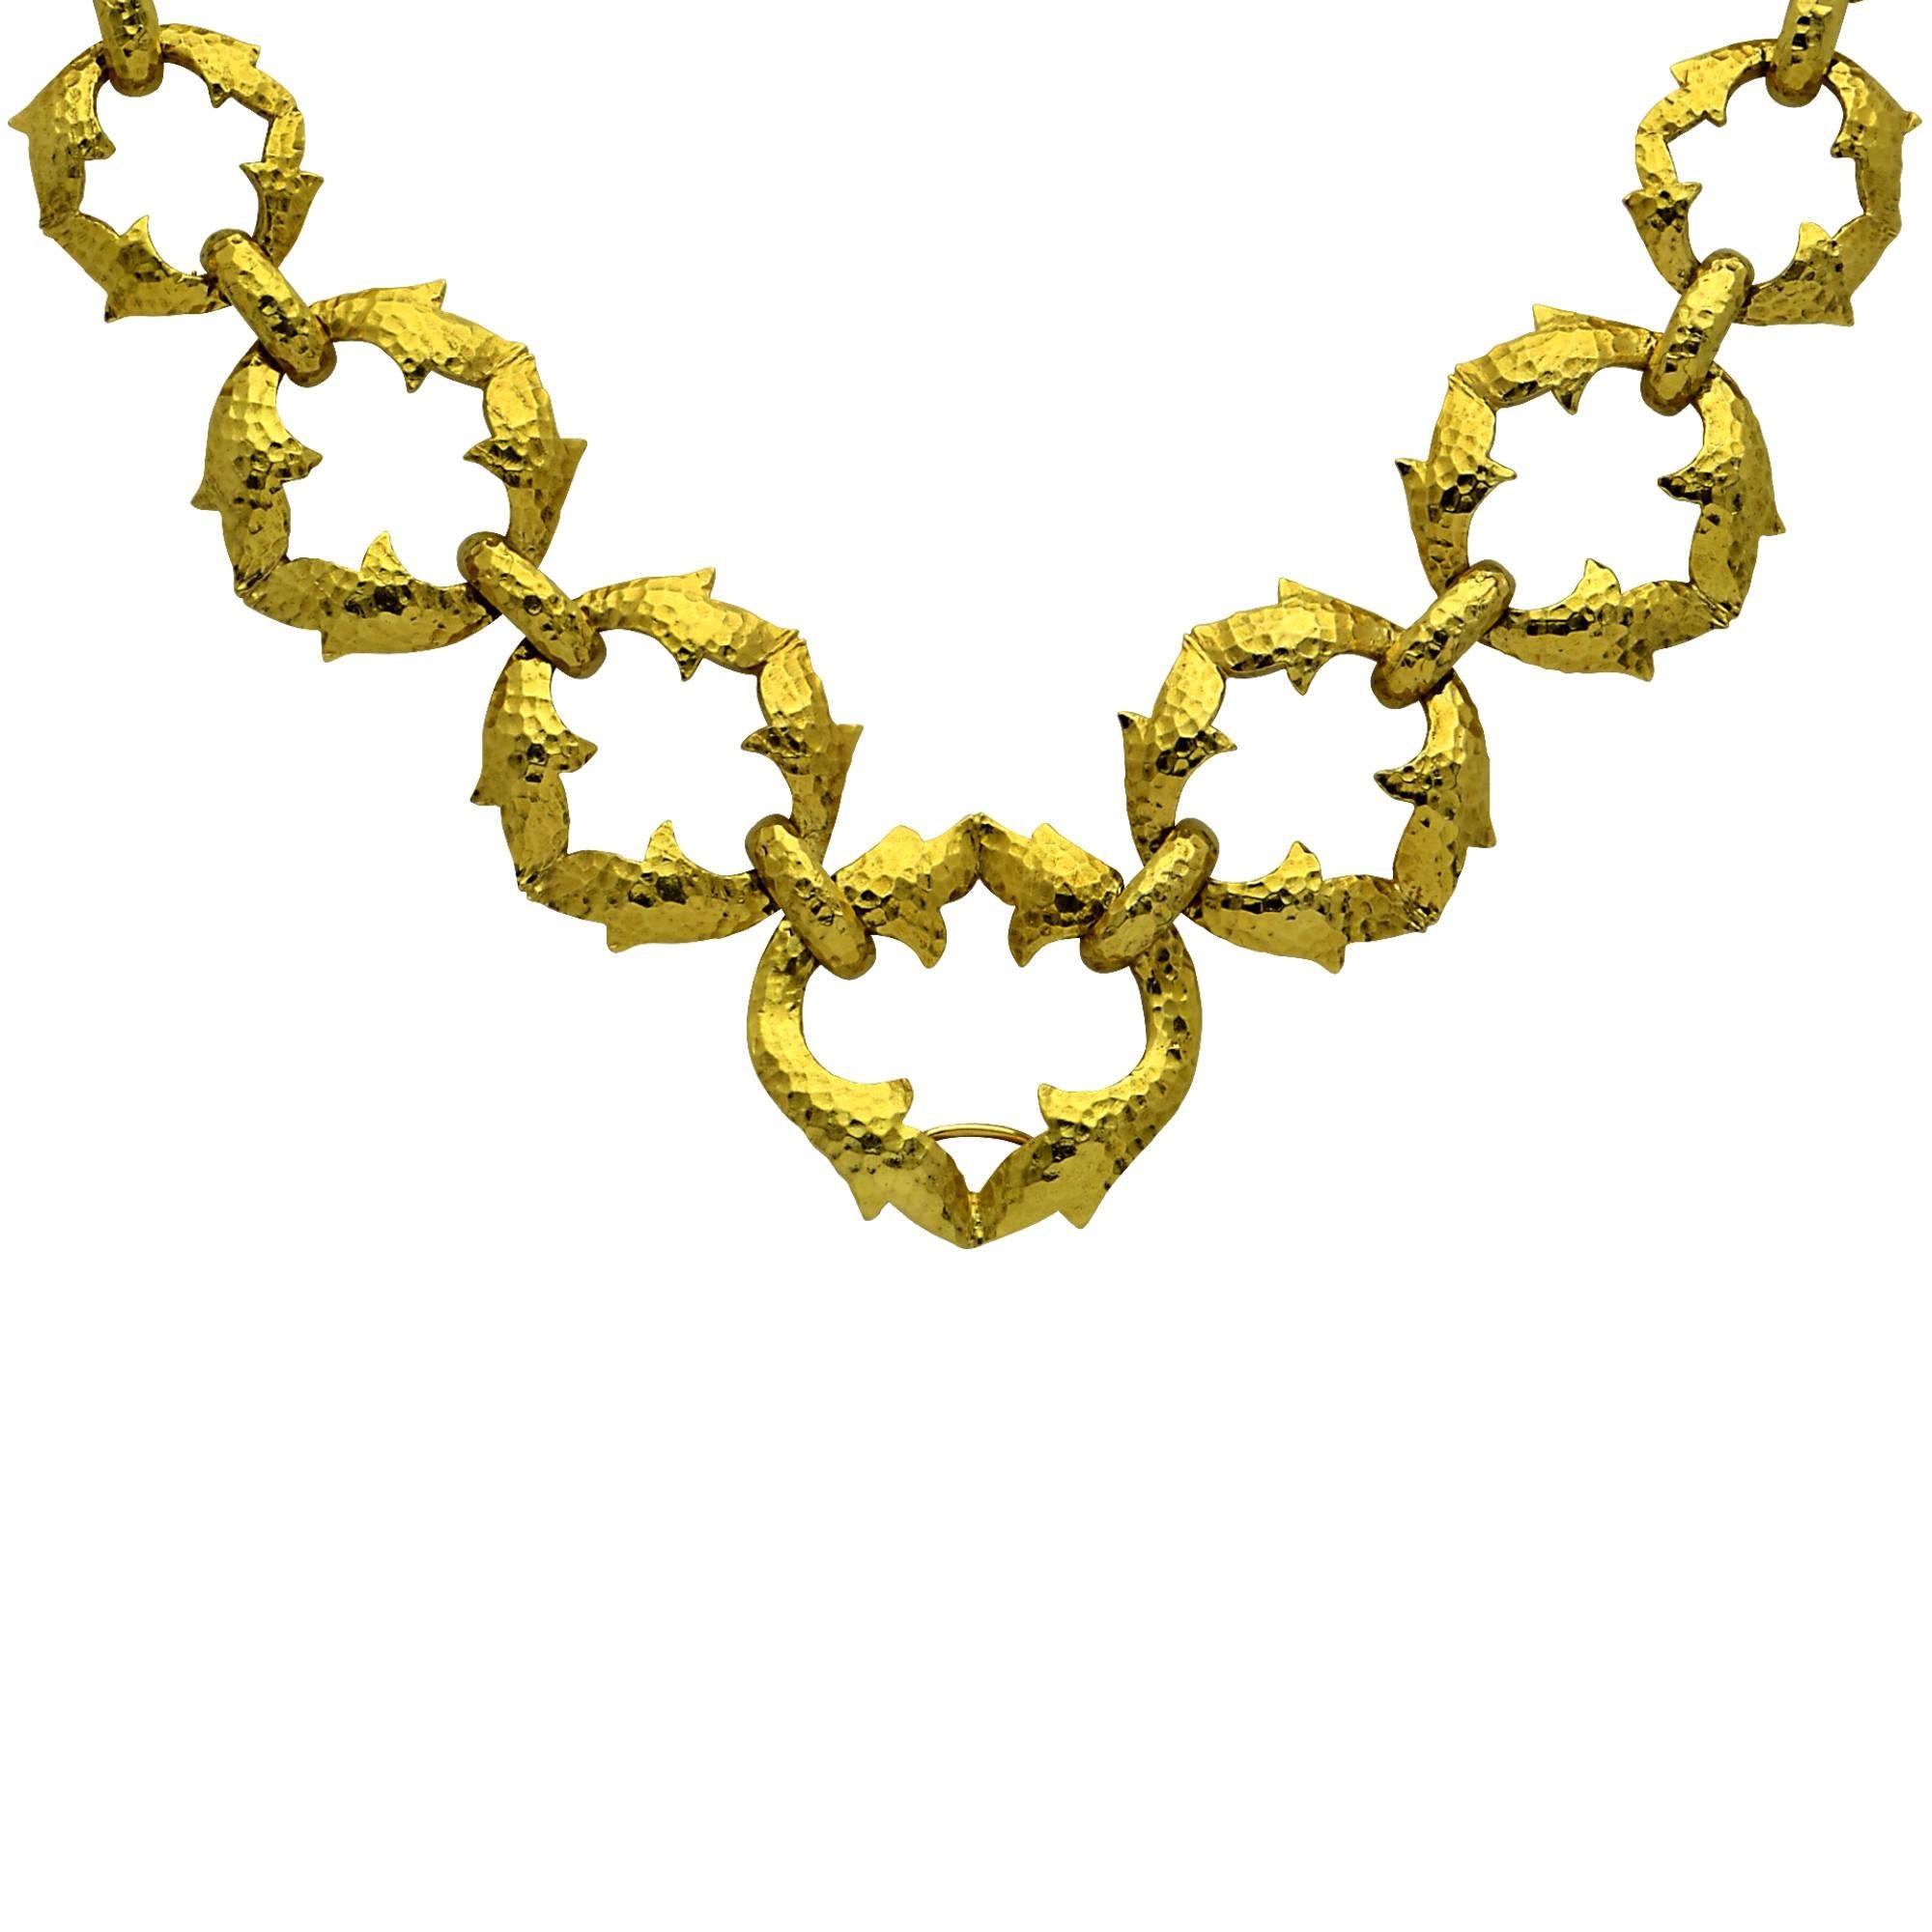 David Webb 18k yellow hammered gold necklace, designed in a flowing leafy motif. Measuring 28 inches in length and weighing 195.85 grams. This spectacular necklace can also be taken apart and worn as a bracelet. The set is accompanied by a document